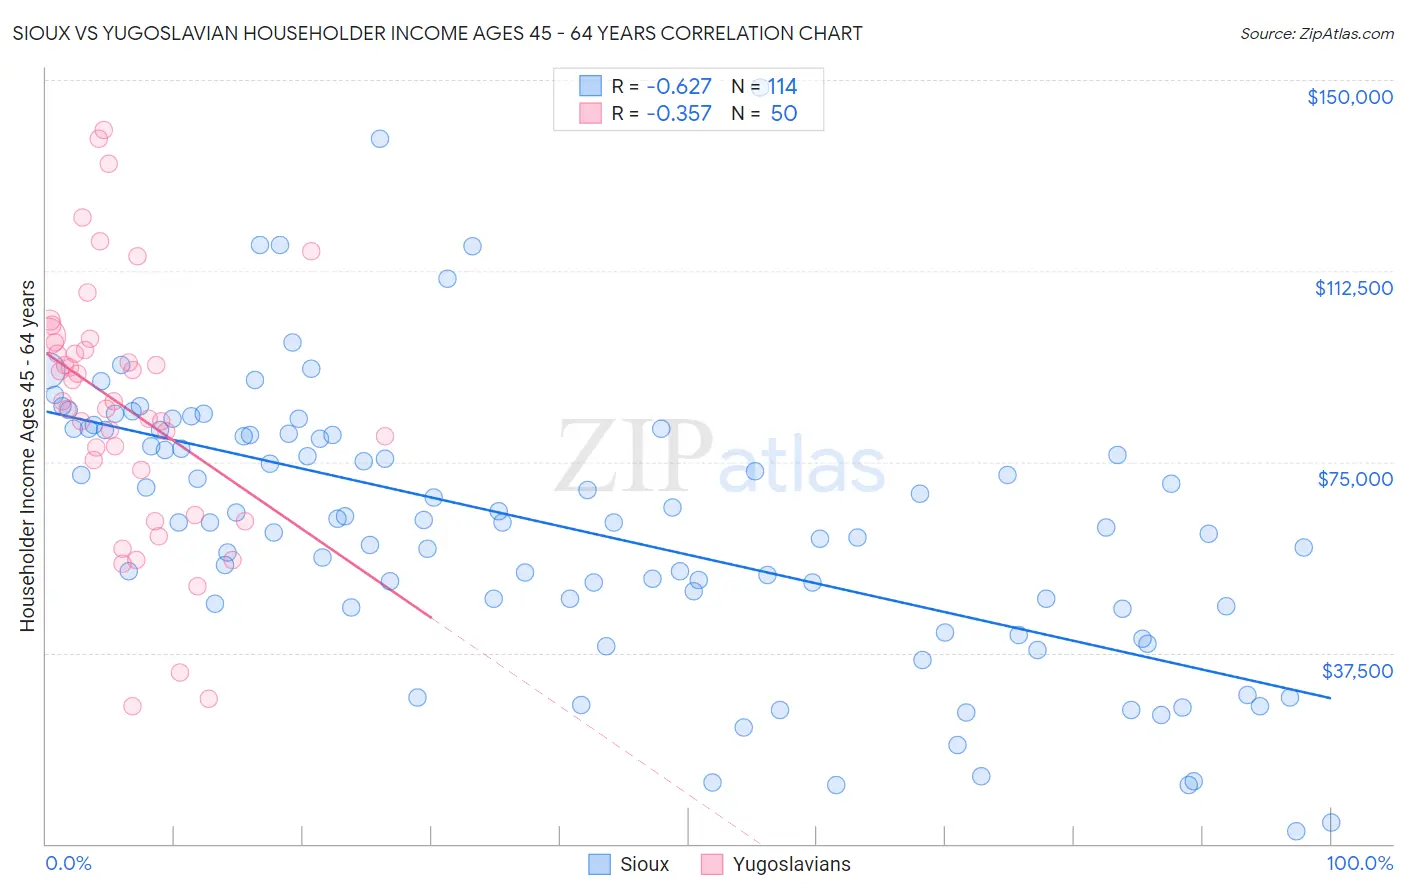 Sioux vs Yugoslavian Householder Income Ages 45 - 64 years